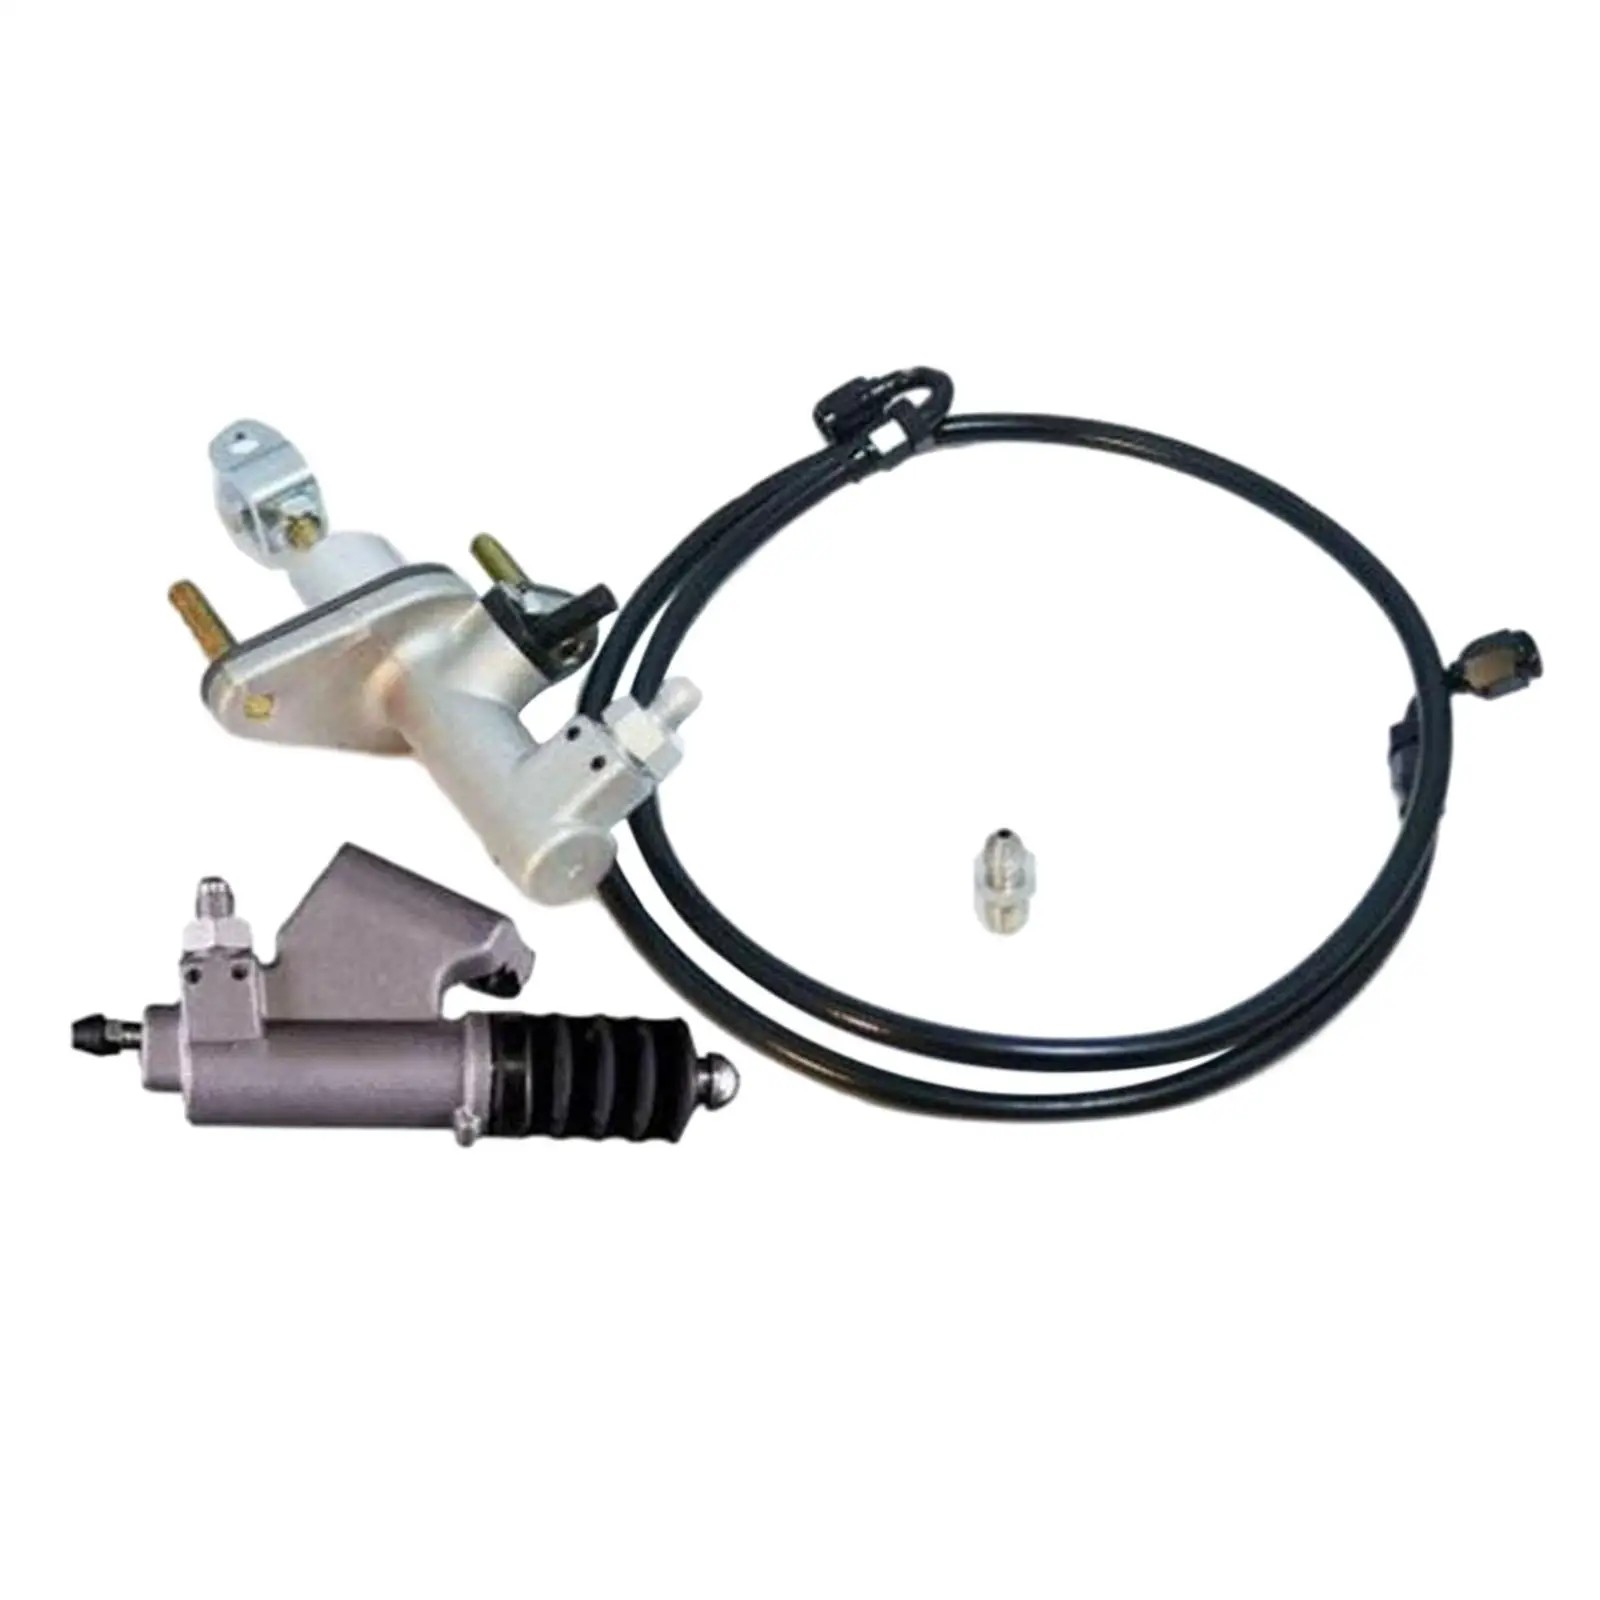 Ktd-clk-kms Clutch Master Cylinder Kit for Acura Automotive Accessories